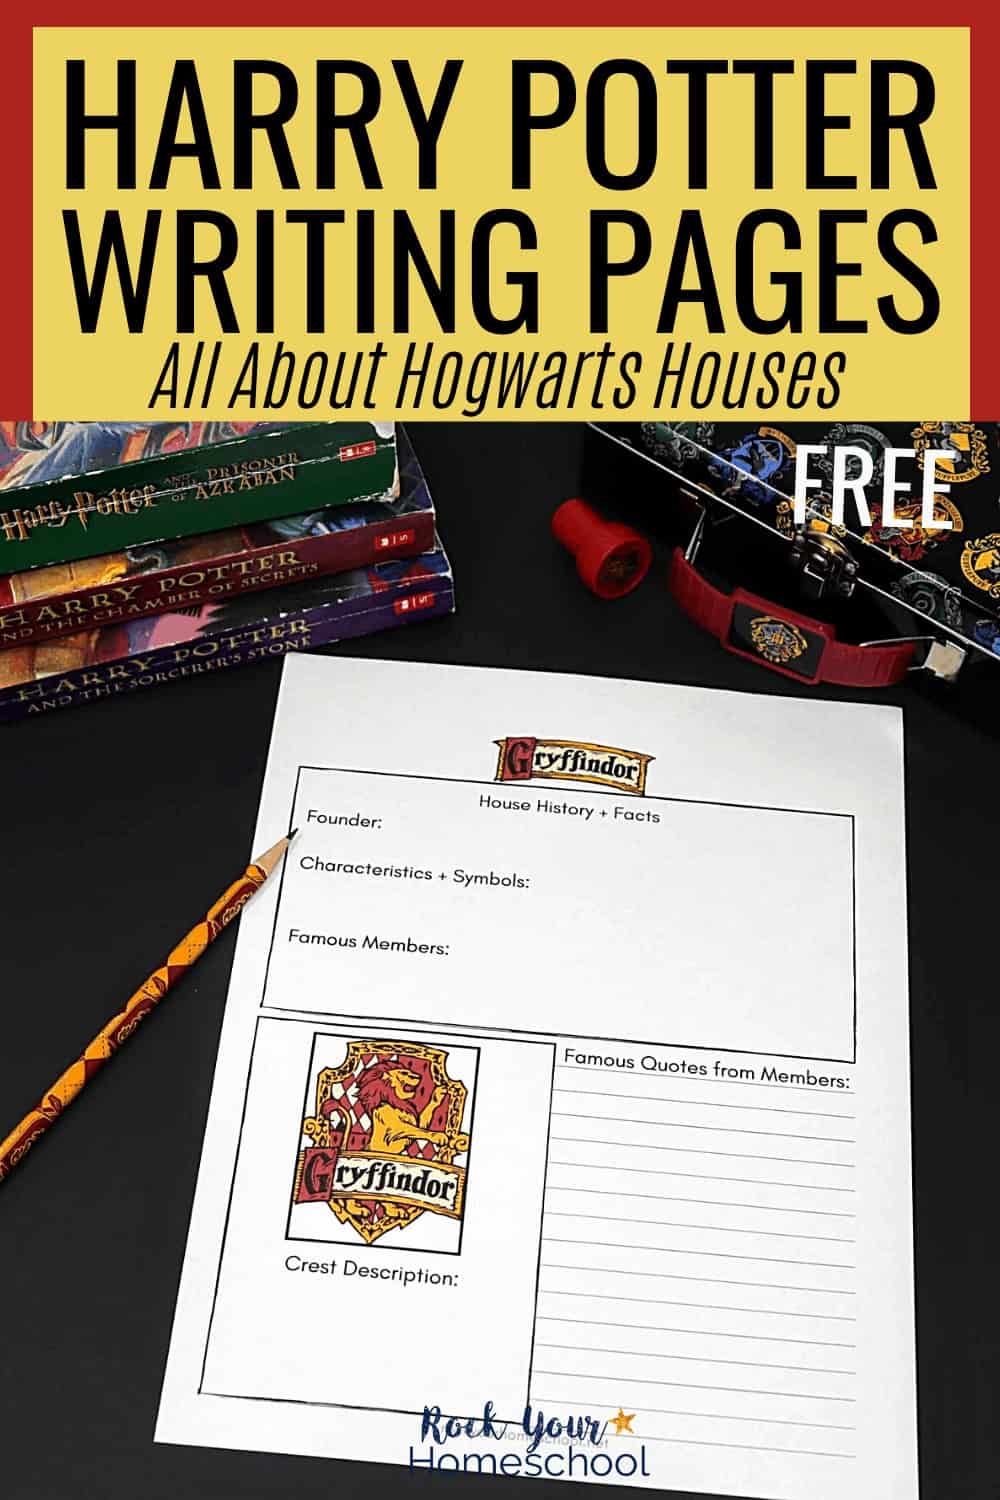 All About Hogwarts Houses: Free Harry Potter Writing Pages